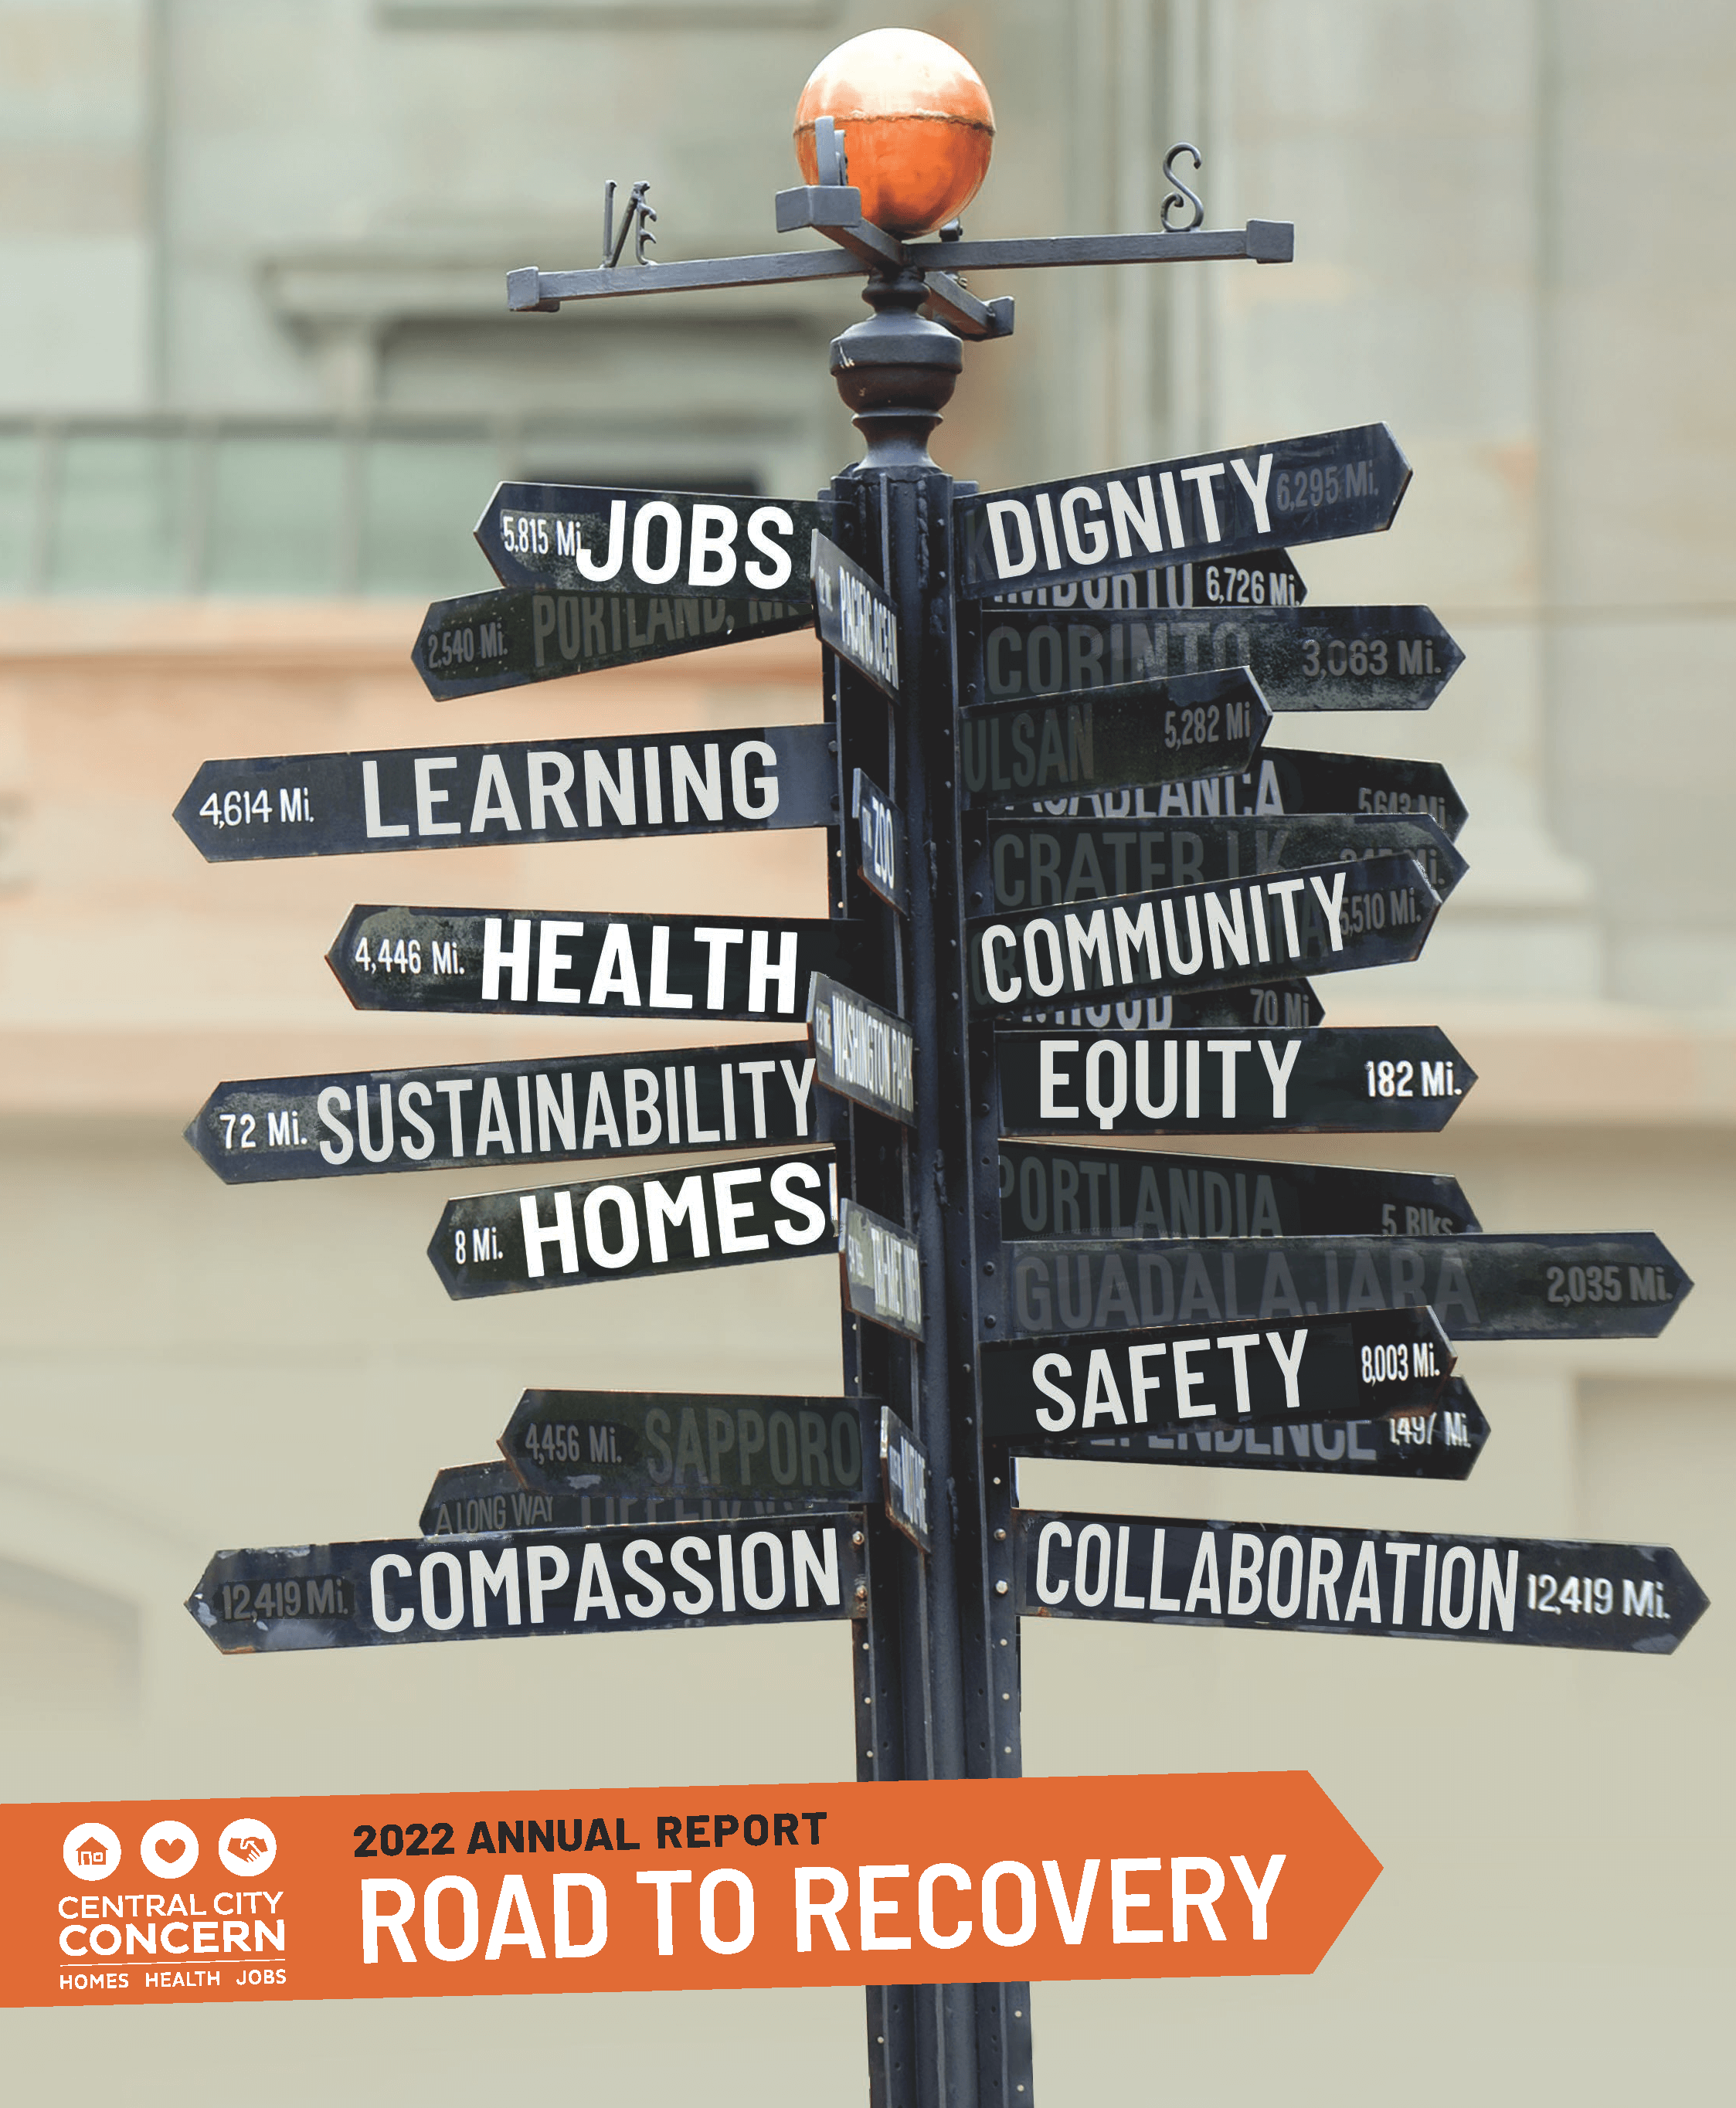 2022 Annual Report: Road to Recovery